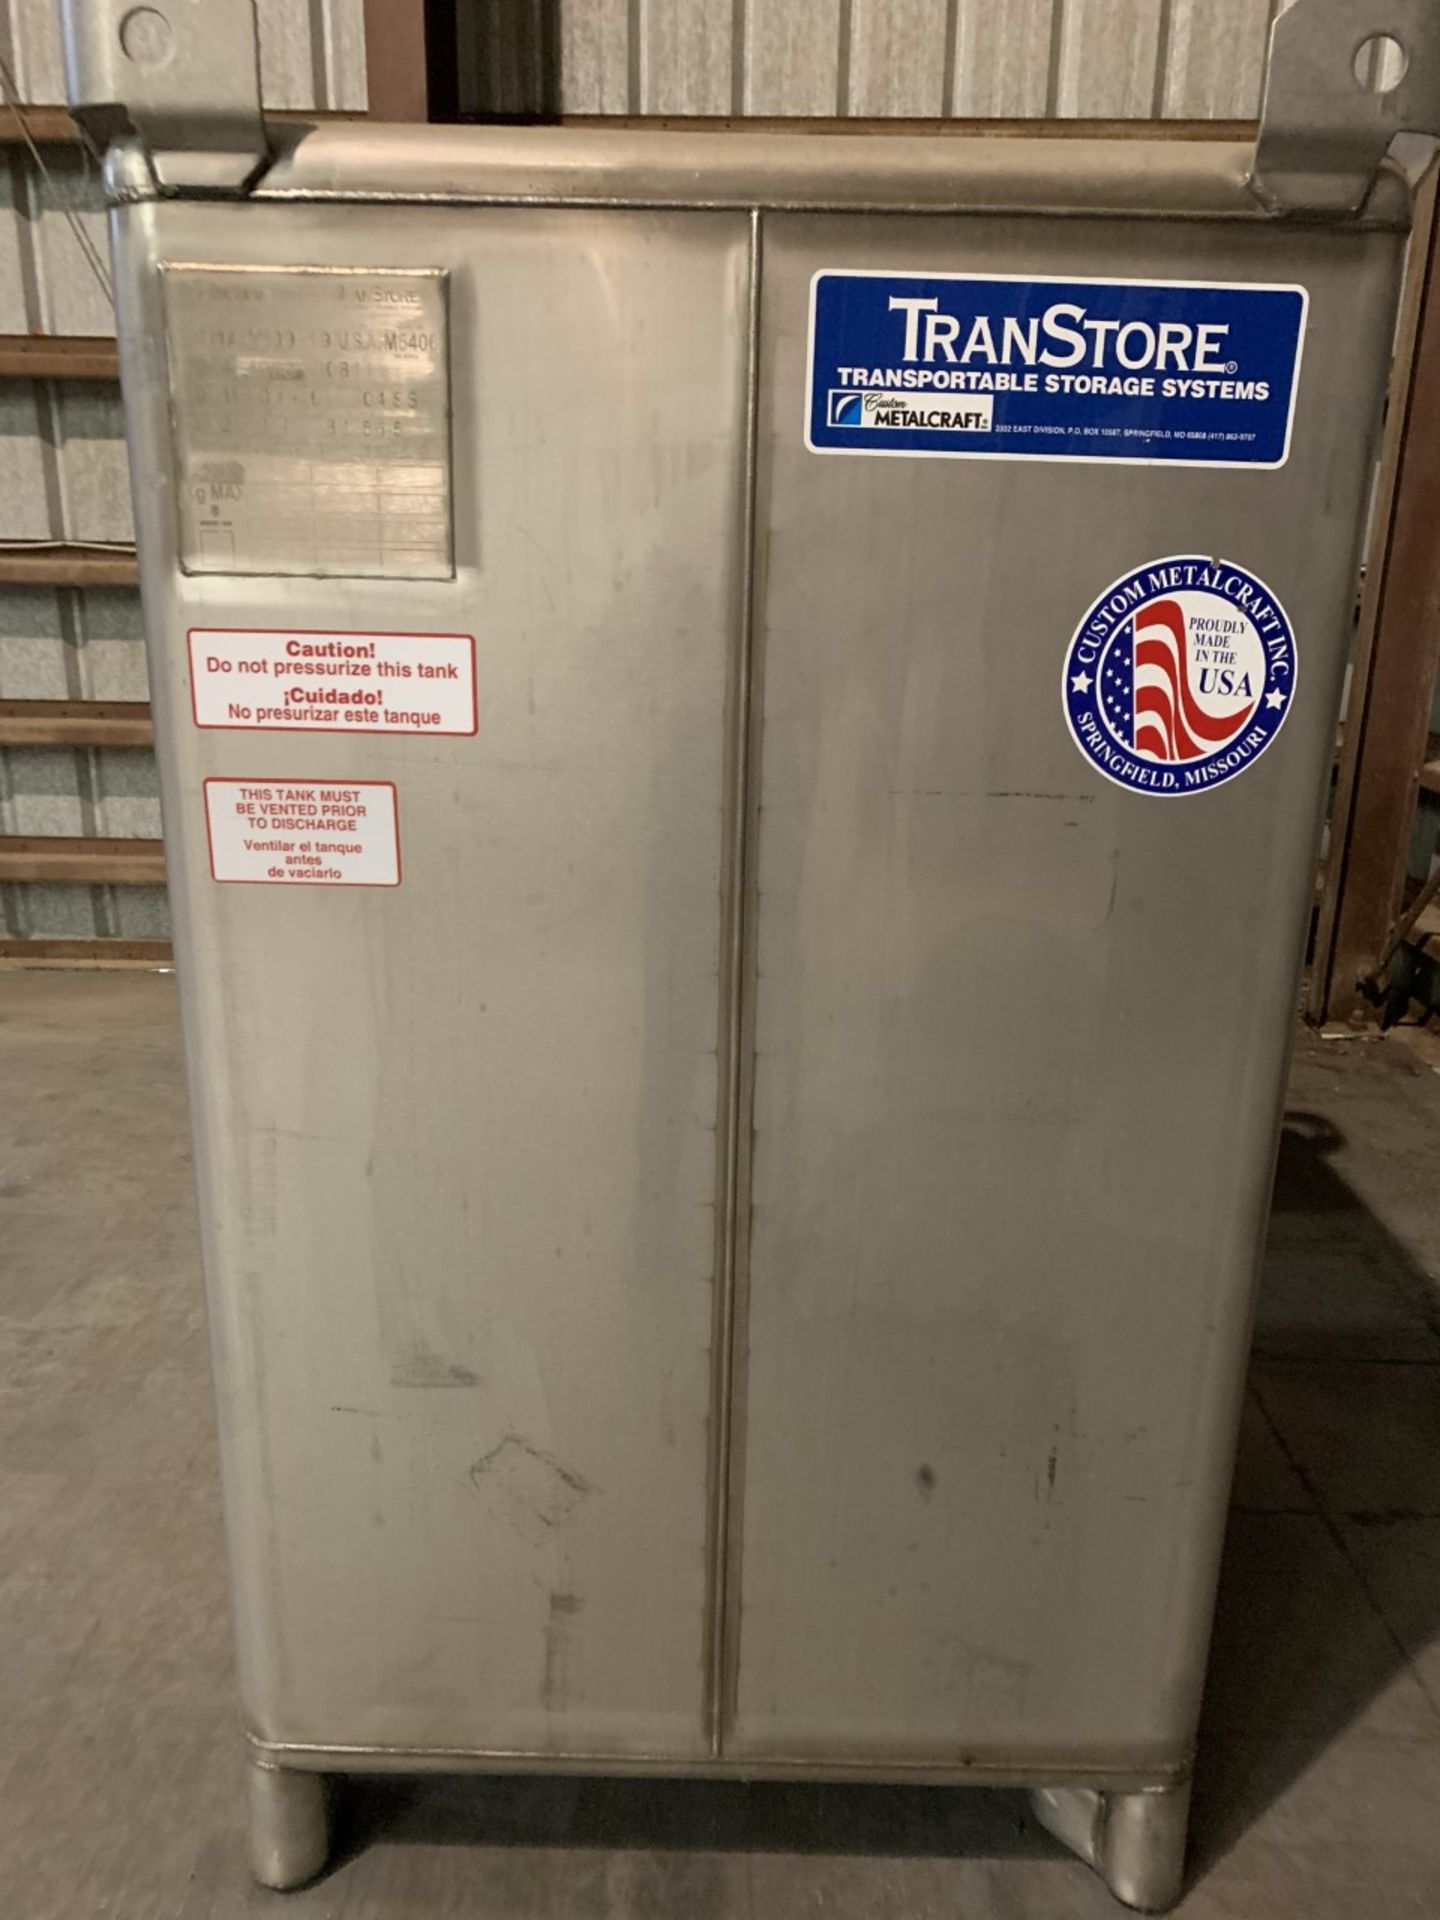 Lot of (3) Used MetalCraft TranStore Tote Bins/Solvent Storage Tanks. 550 Gallons. Type 81A Group Y - Image 3 of 5